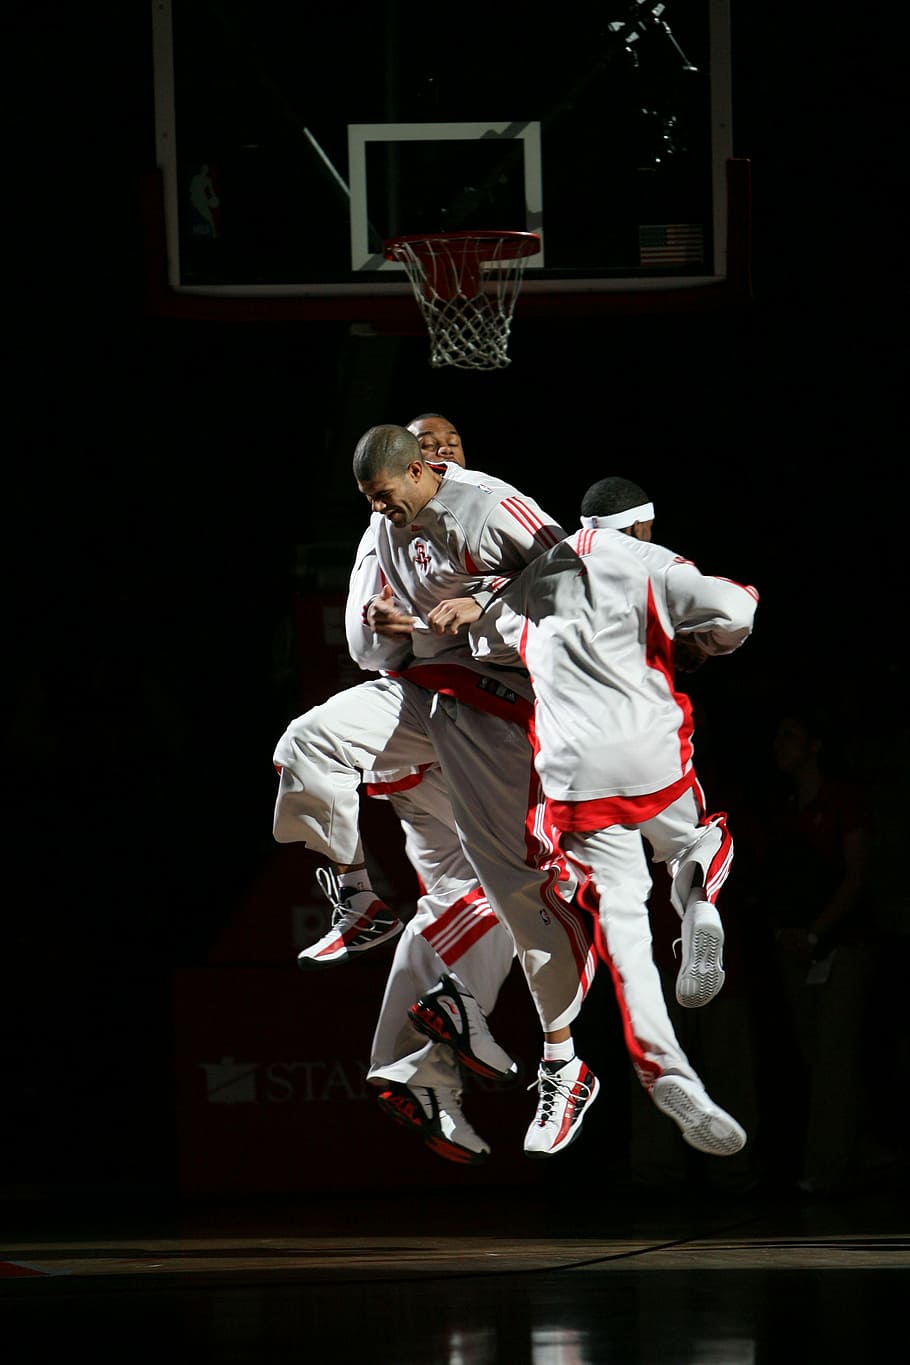 professional basketball, players, pre-game, jumping, team, sport, athlete, game, play, action